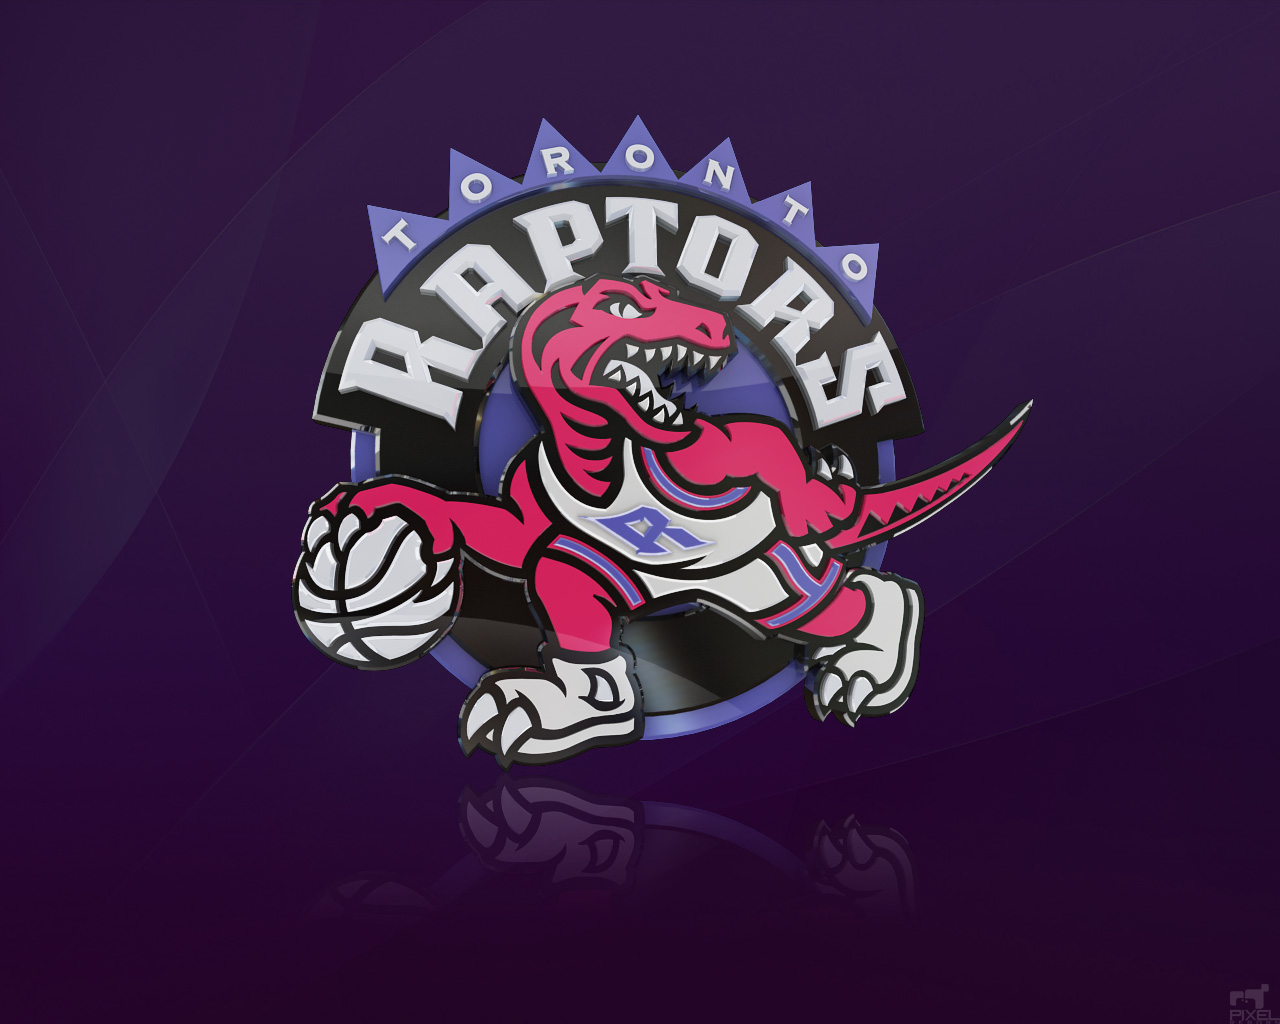 Before they were the Raptors, Toronto's NBA team was nearly the